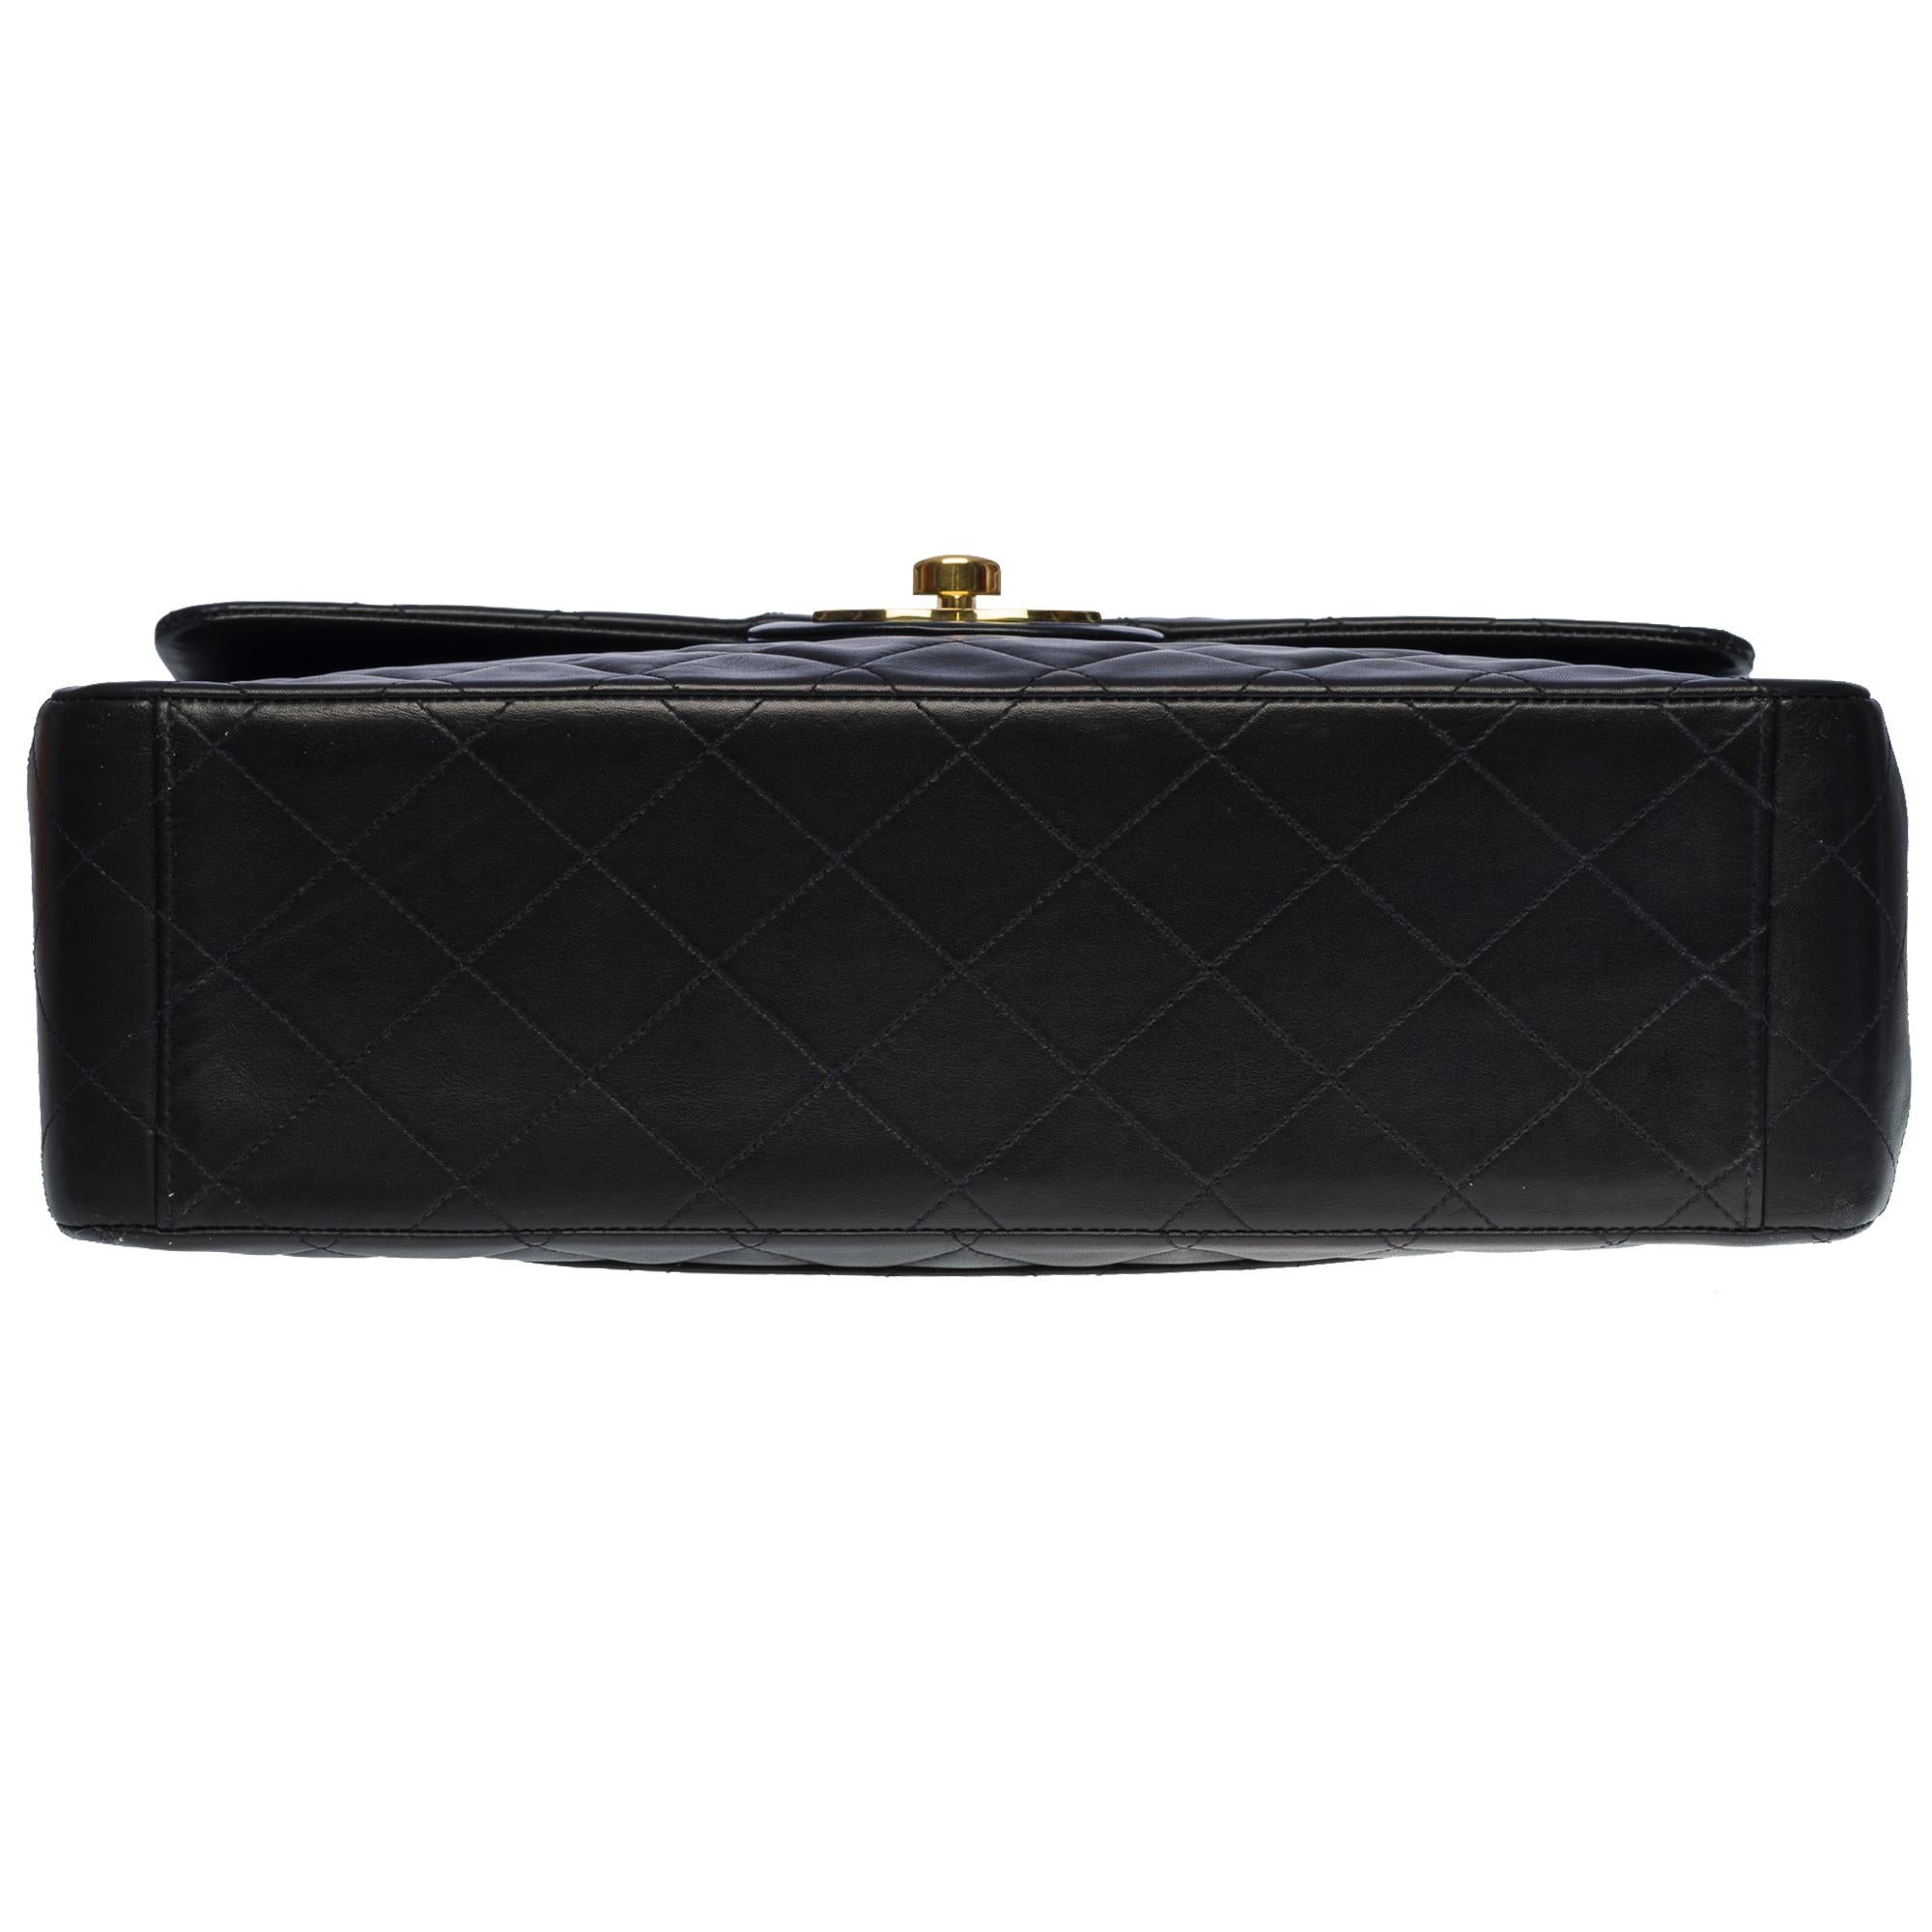 Chanel Timeless Maxi Jumbo flap shoulder bag in black quilted lambskin, GHW 5